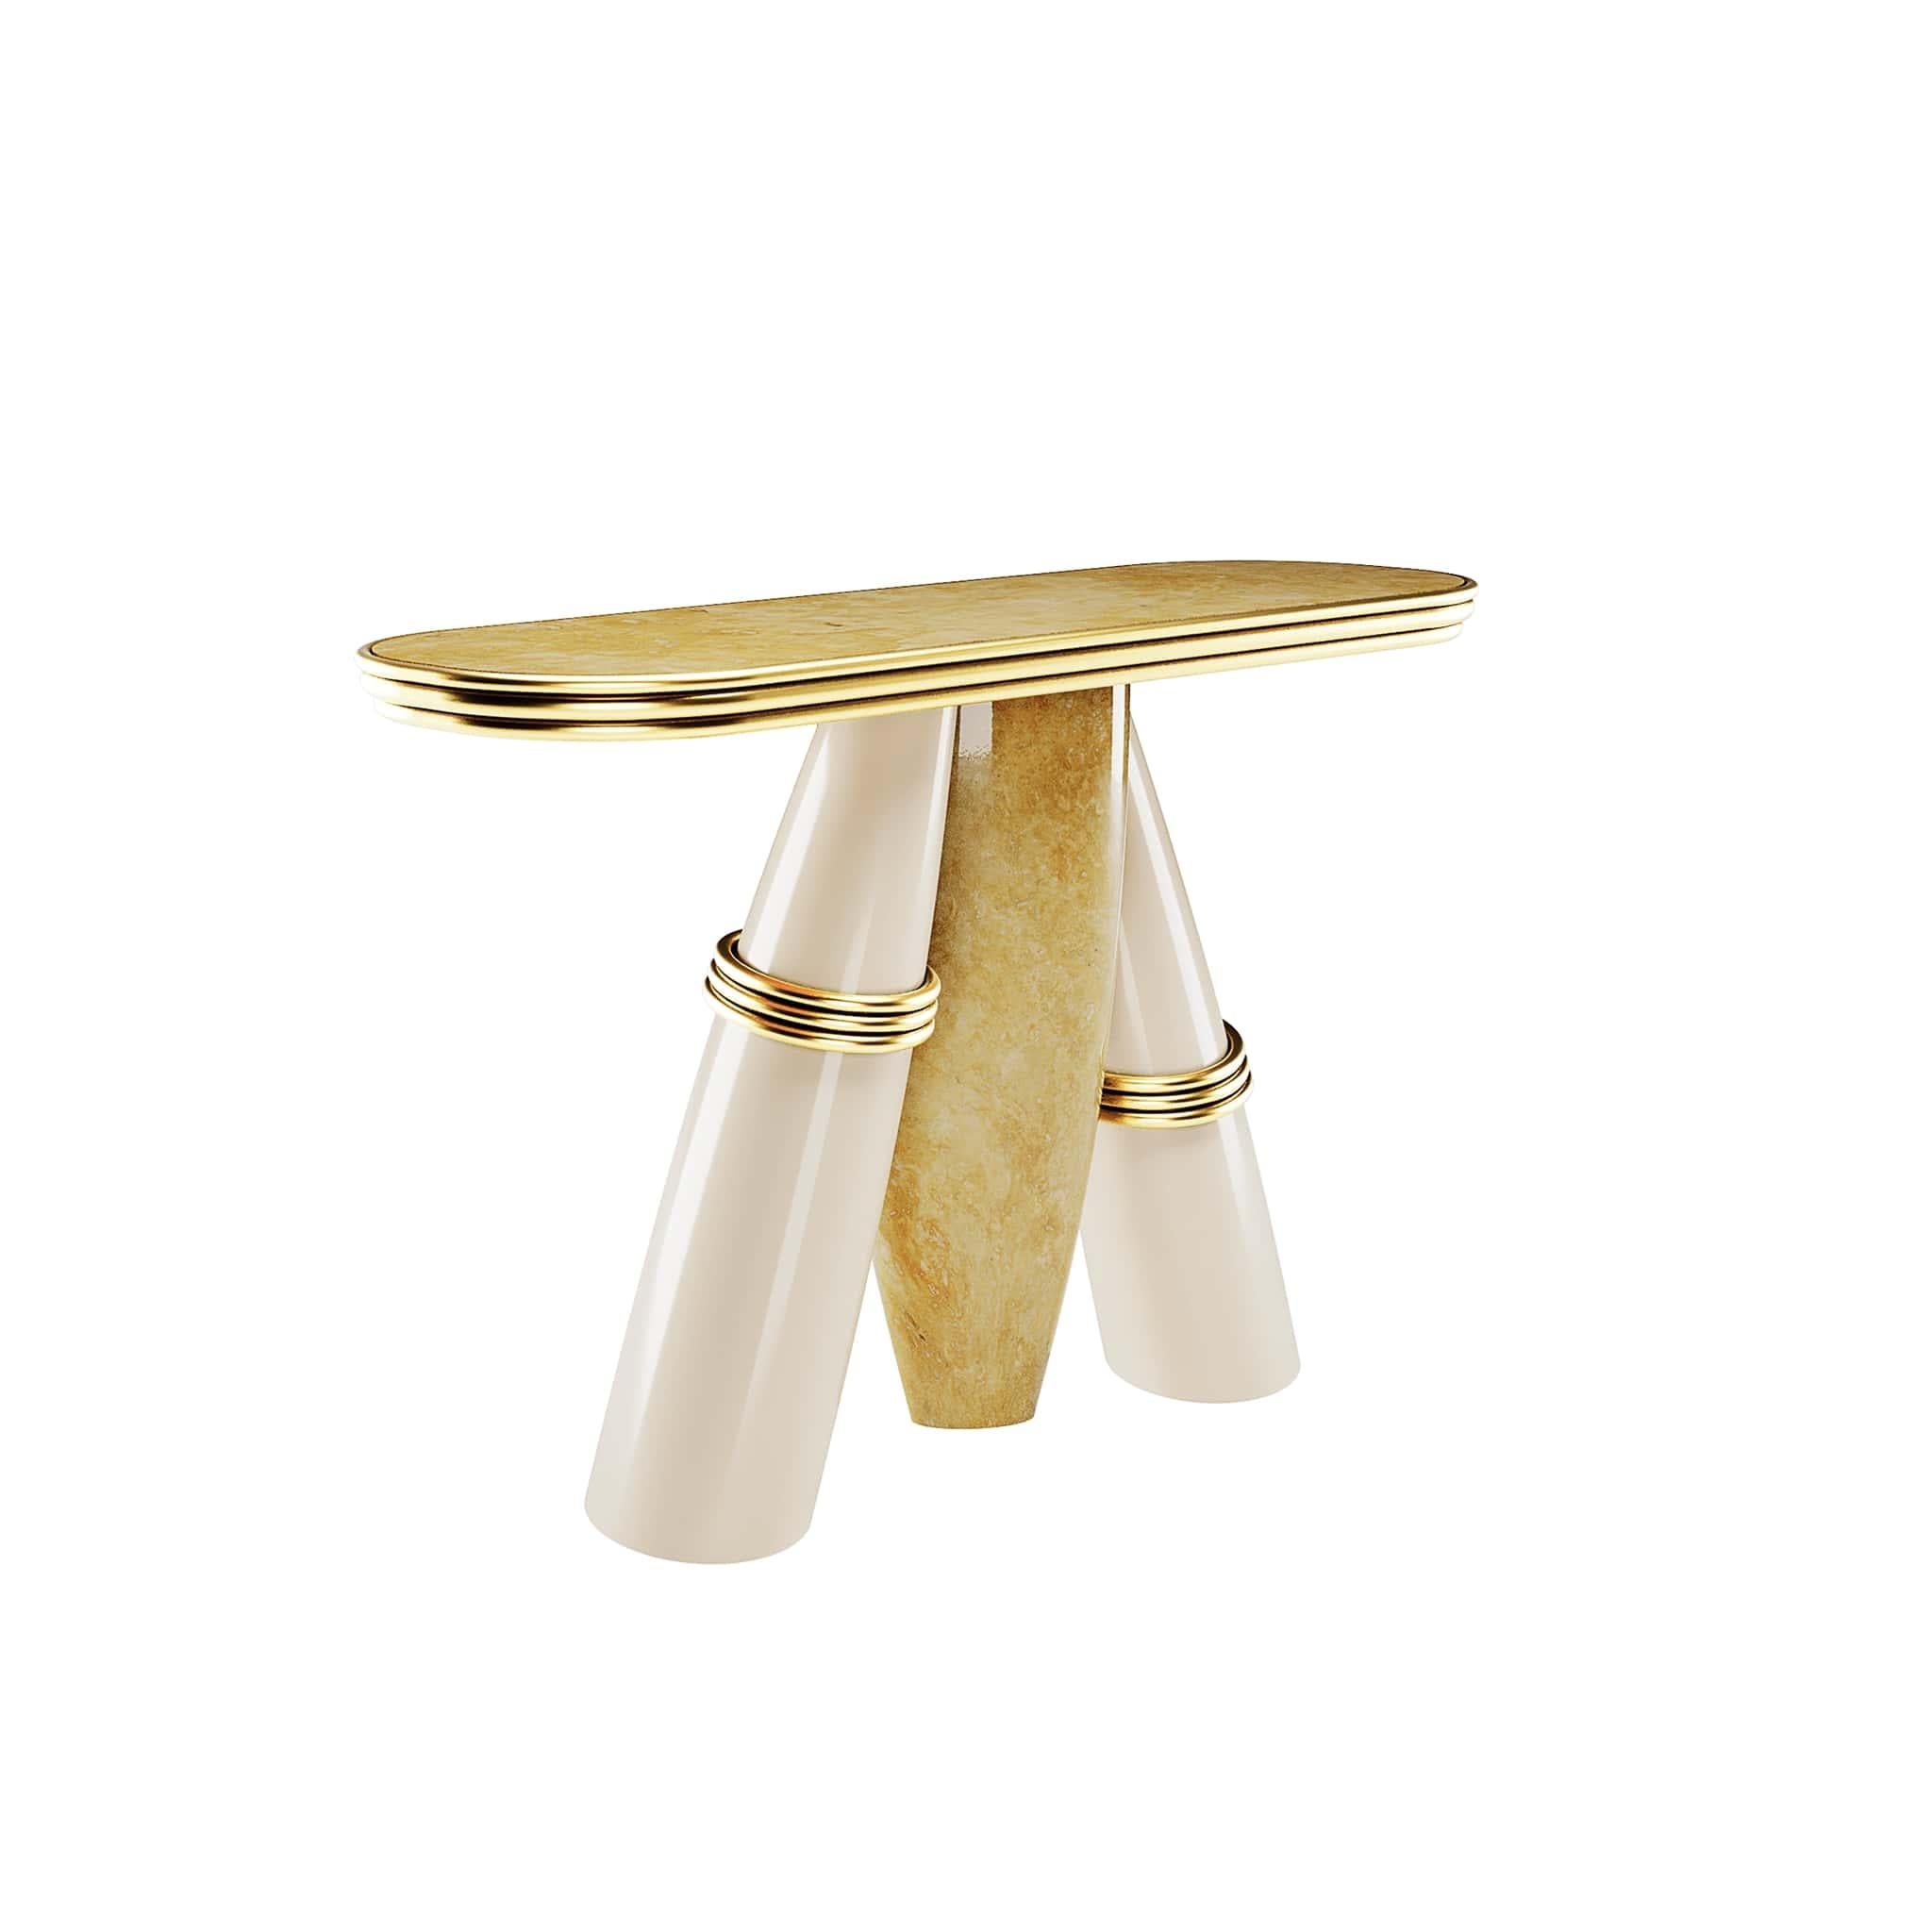 Billie Console Table owns a striking attitude and sculptural shapes. A modern marble table with polished brass details promises to steal the show of any contemporary entryway design.

Materials: Top in Polished Yellow Negrais Marble; Legs in